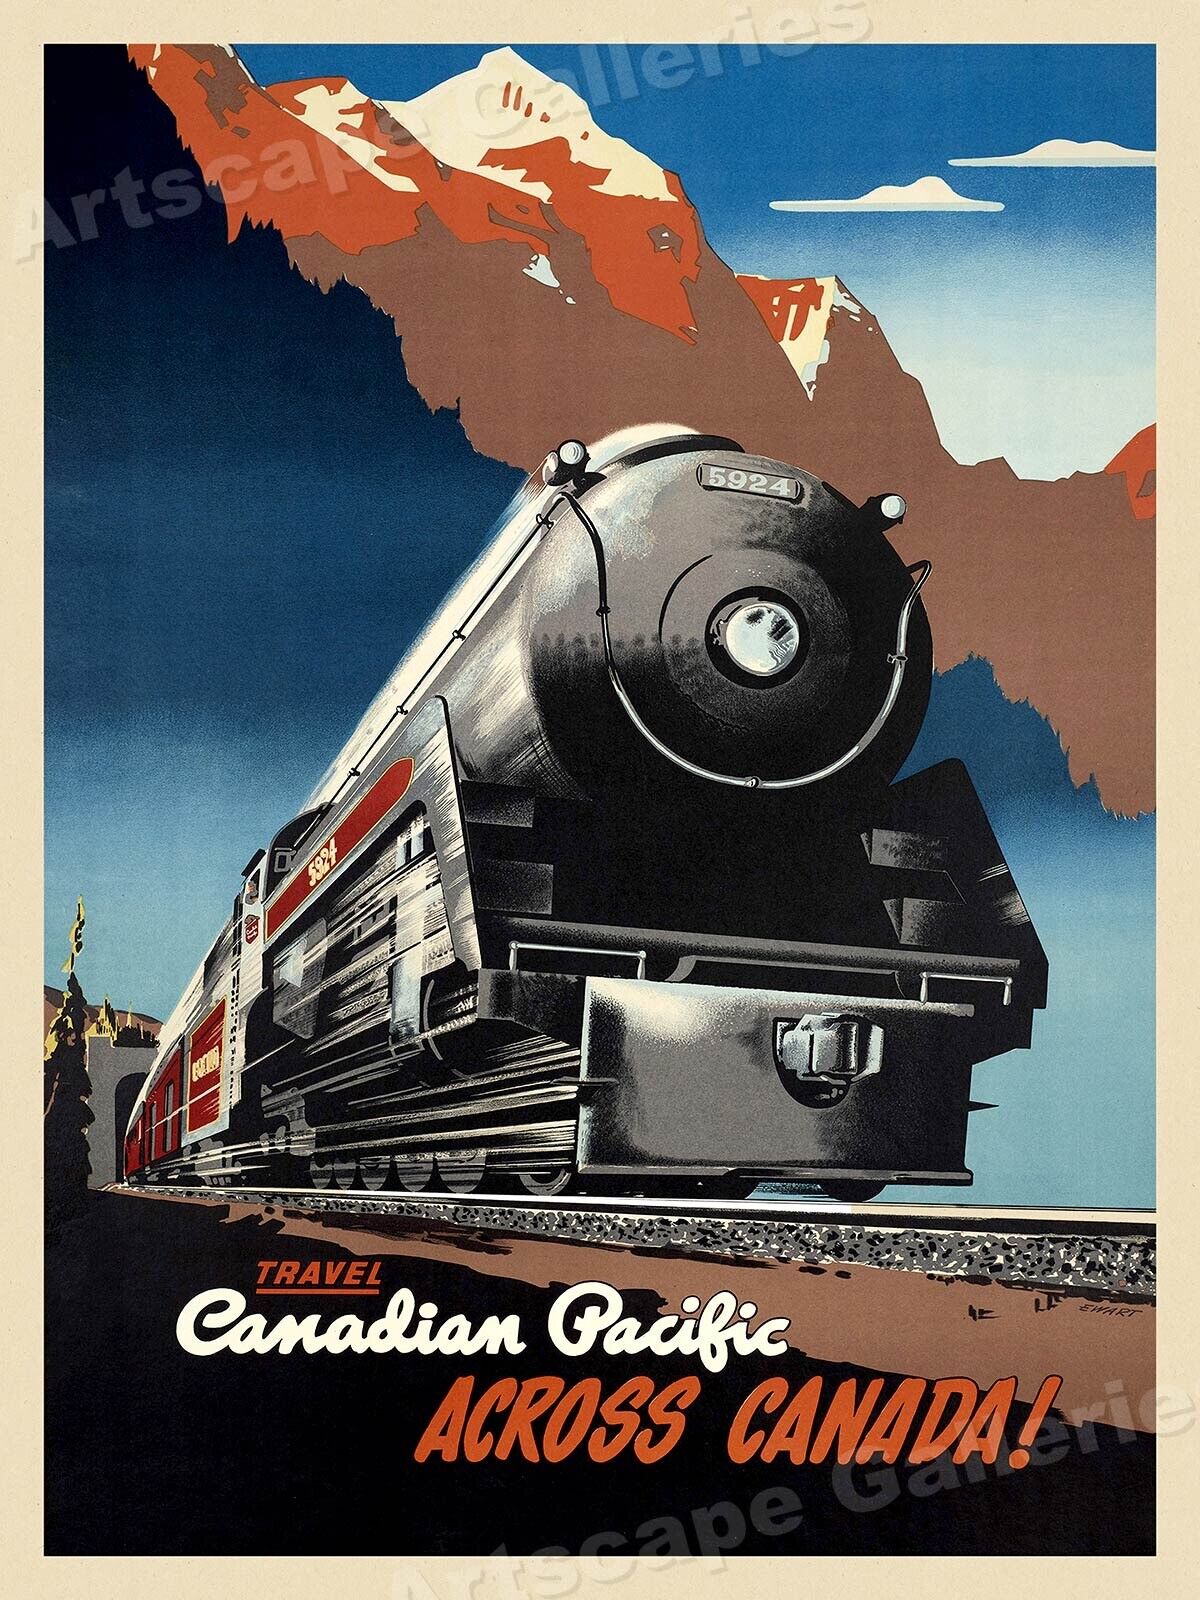 Canadian Pacific Across Canada 1940s Vintage Style Travel Poster - 20x28